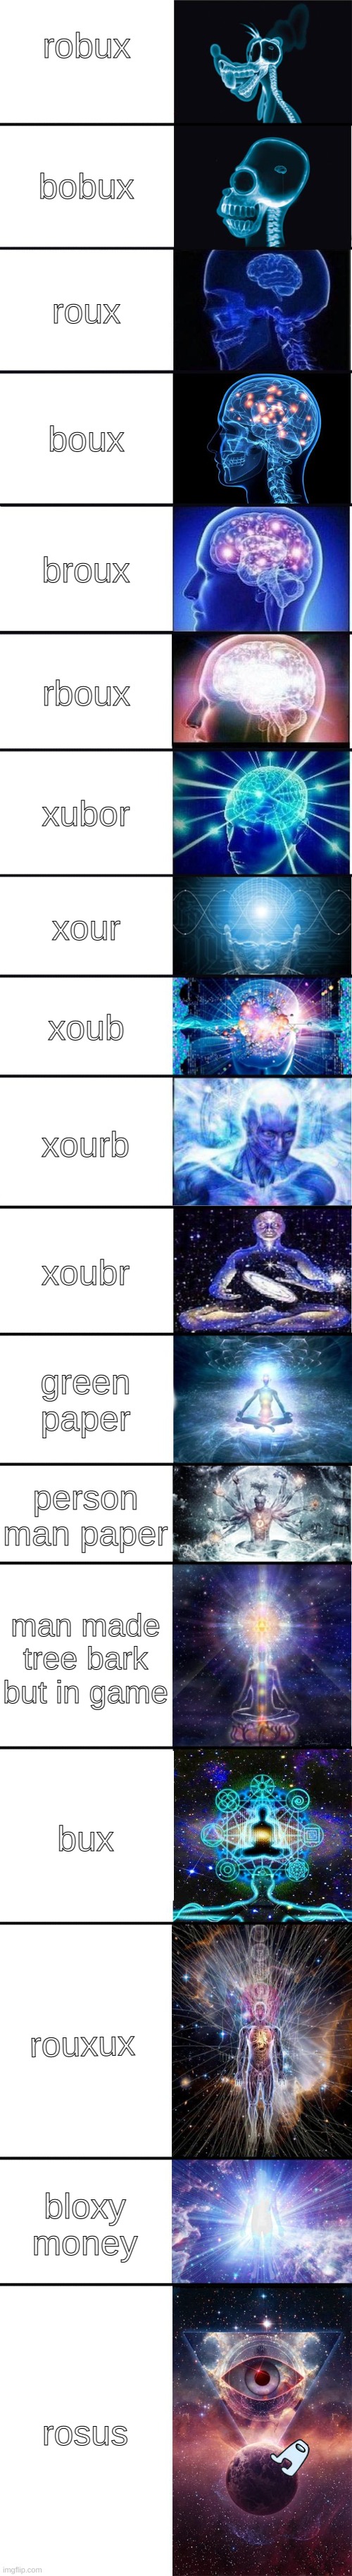 expanding brain: 9001 | robux; bobux; roux; boux; broux; rboux; xubor; xour; xoub; xourb; xoubr; green paper; person man paper; man made tree bark but in game; bux; rouxux; bloxy money; rosus | image tagged in expanding brain 9001,roblox | made w/ Imgflip meme maker